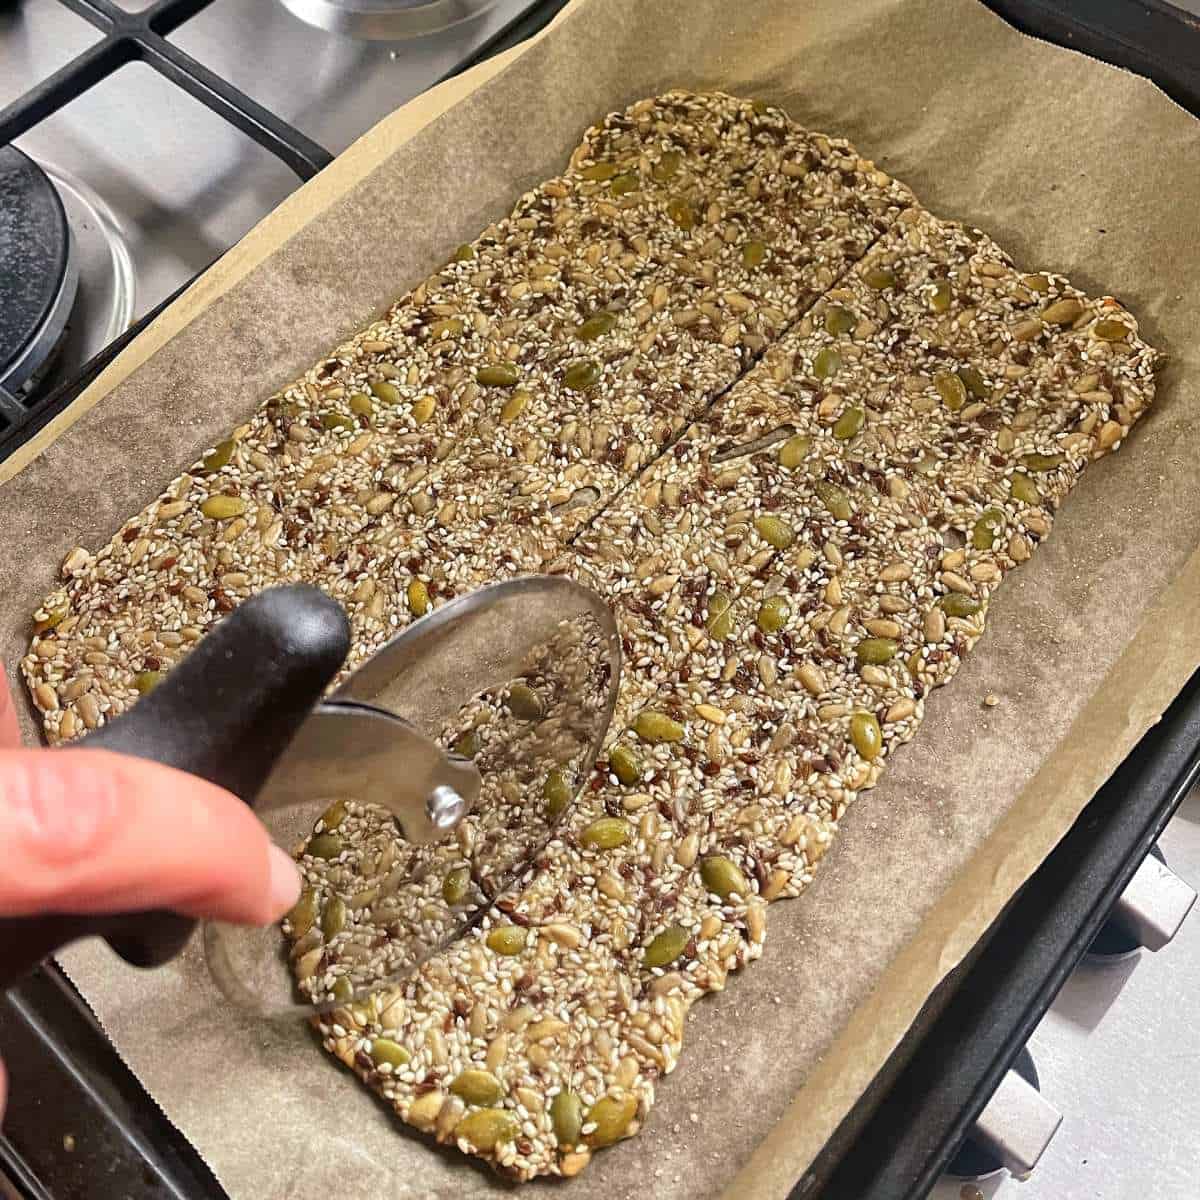 Cooked seeded crackers being sliced into small portions